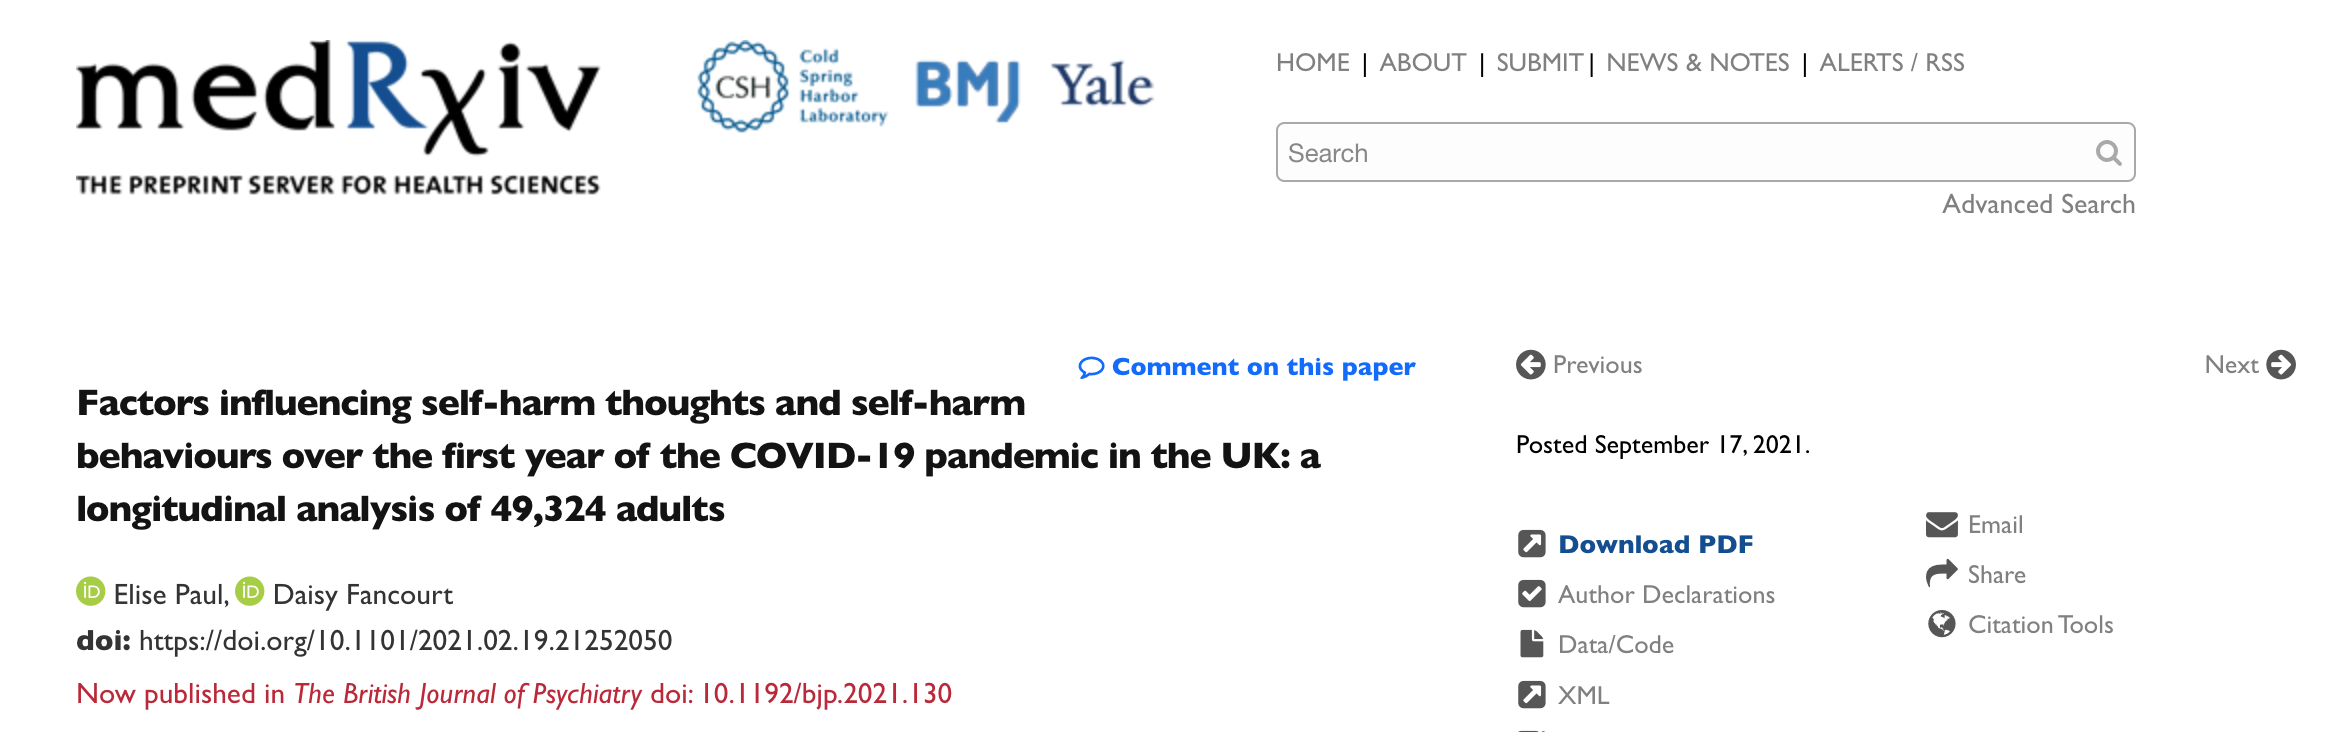 Factors influencing self-harm thoughts and self-harm behaviours over the first year of the COVID19 pandemic in the UK